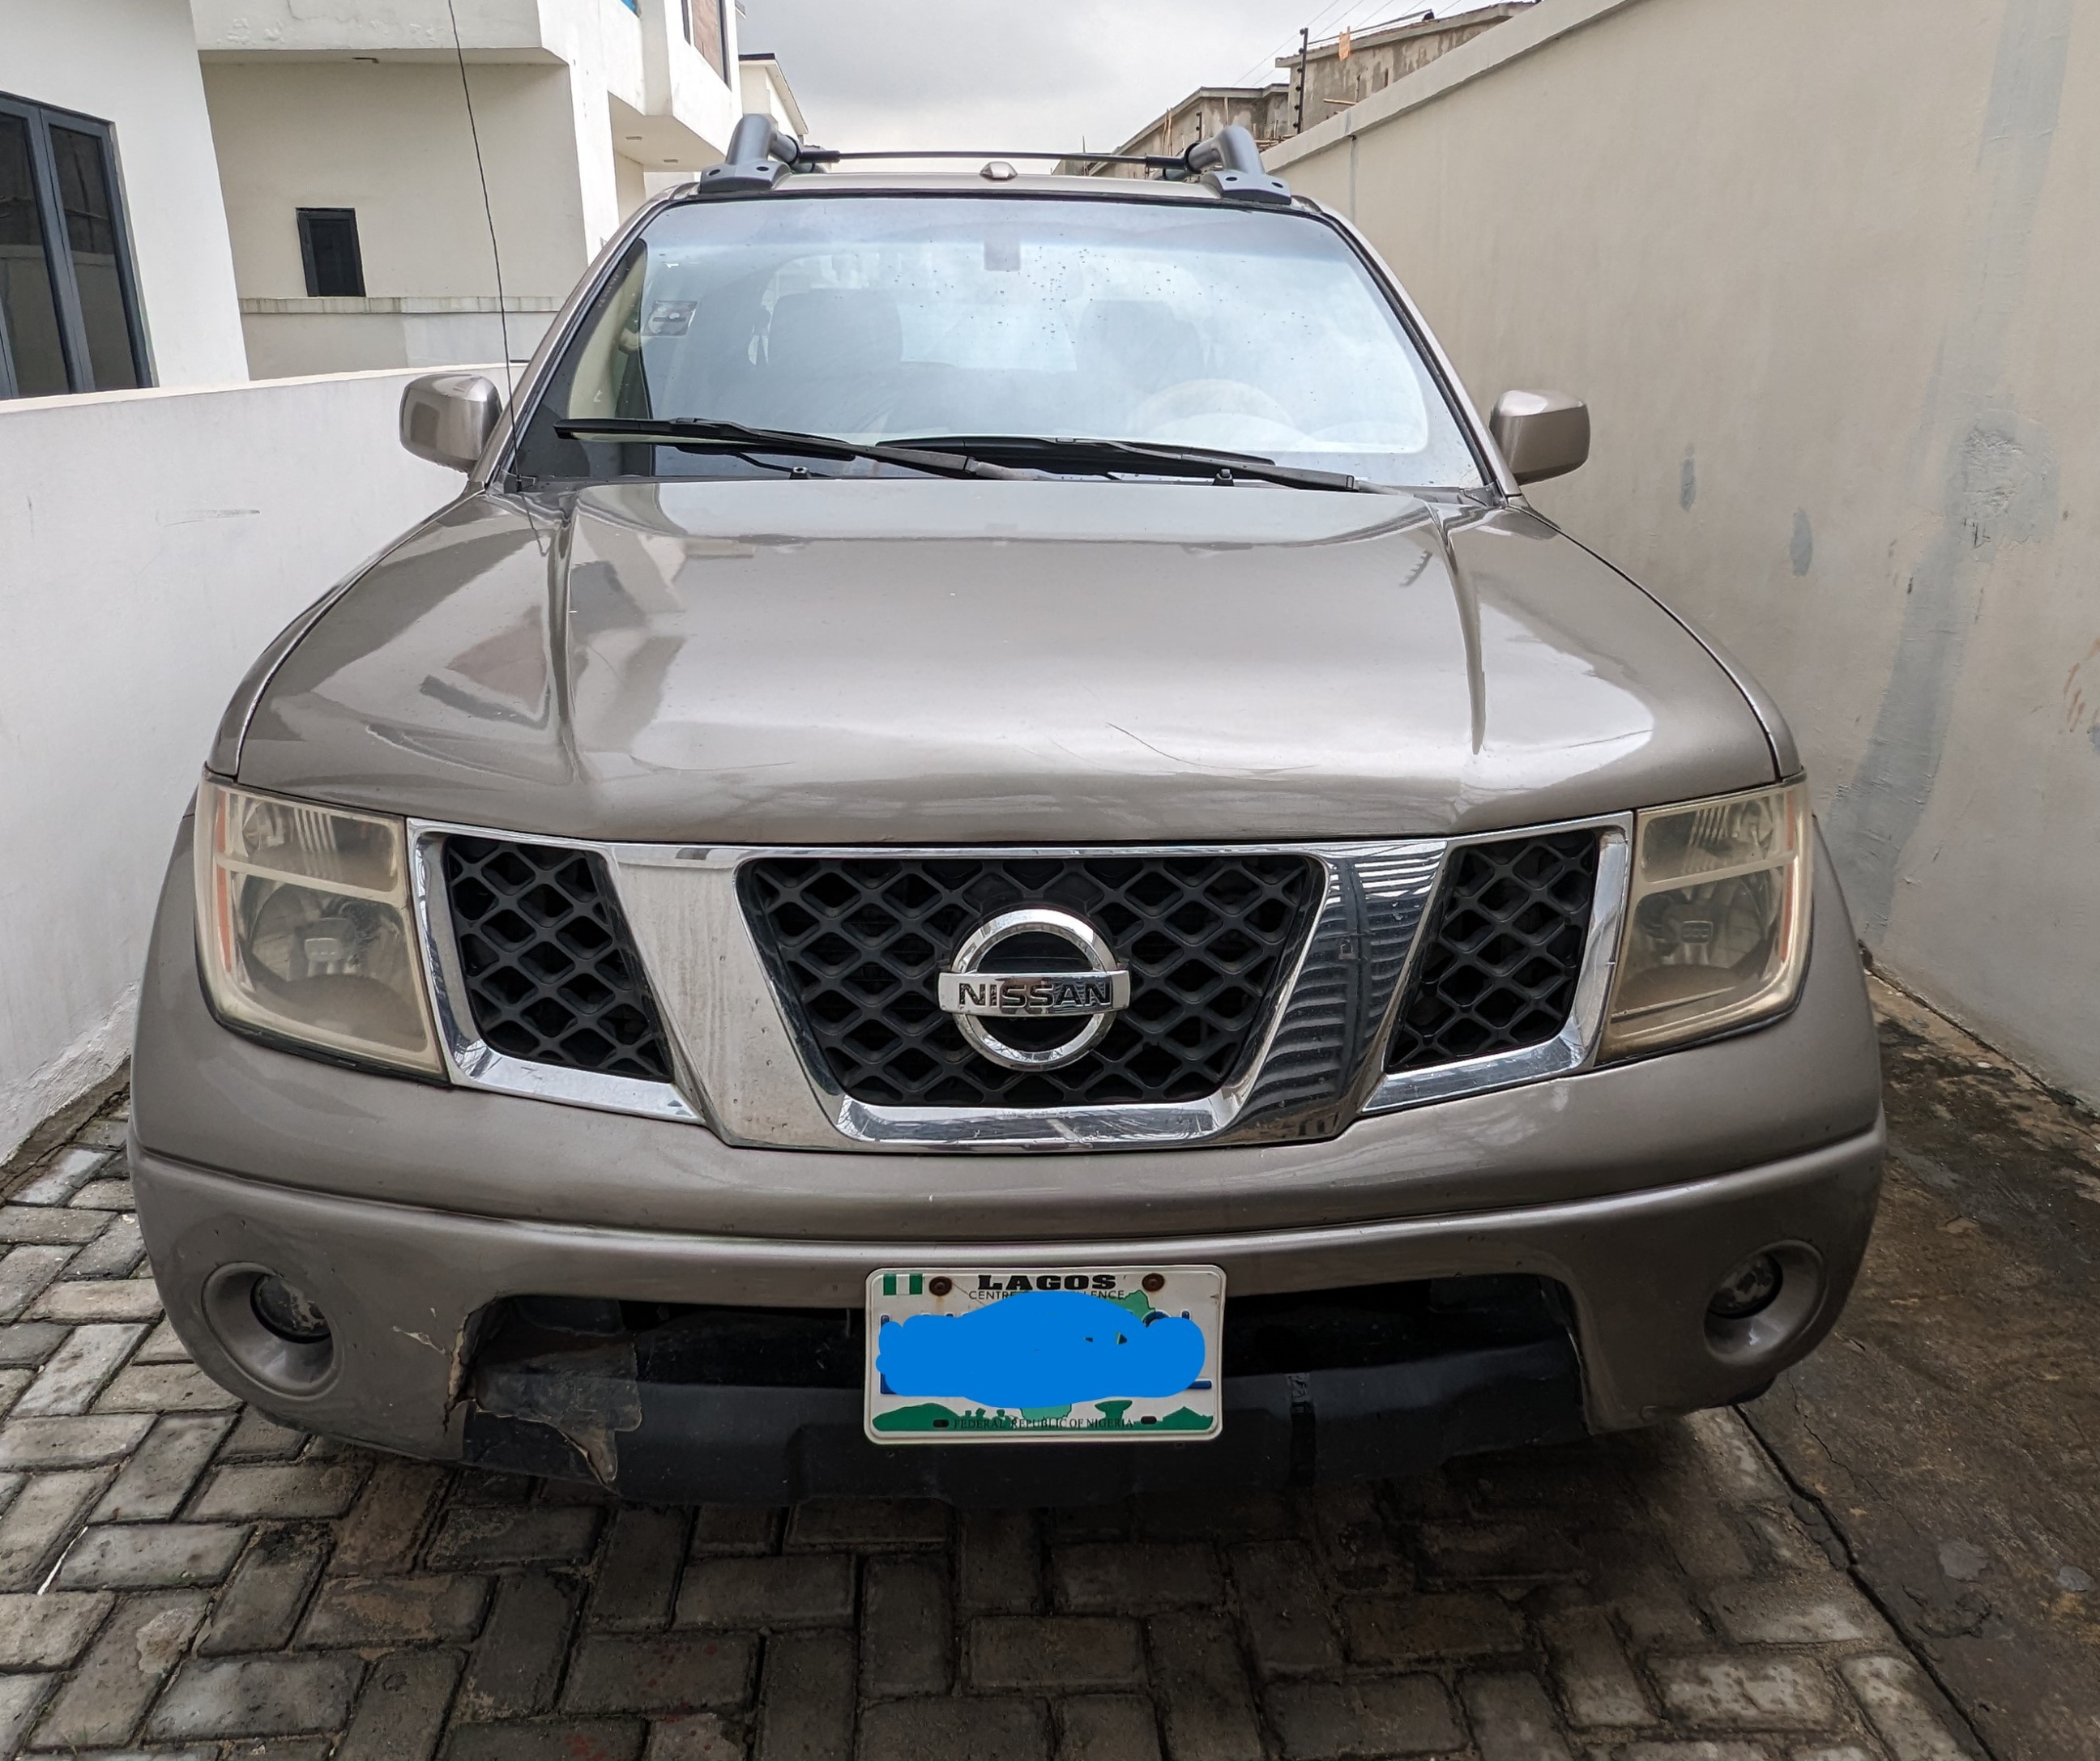 Heavy Duty Nissan Frontiel 2008 is available at Efritin